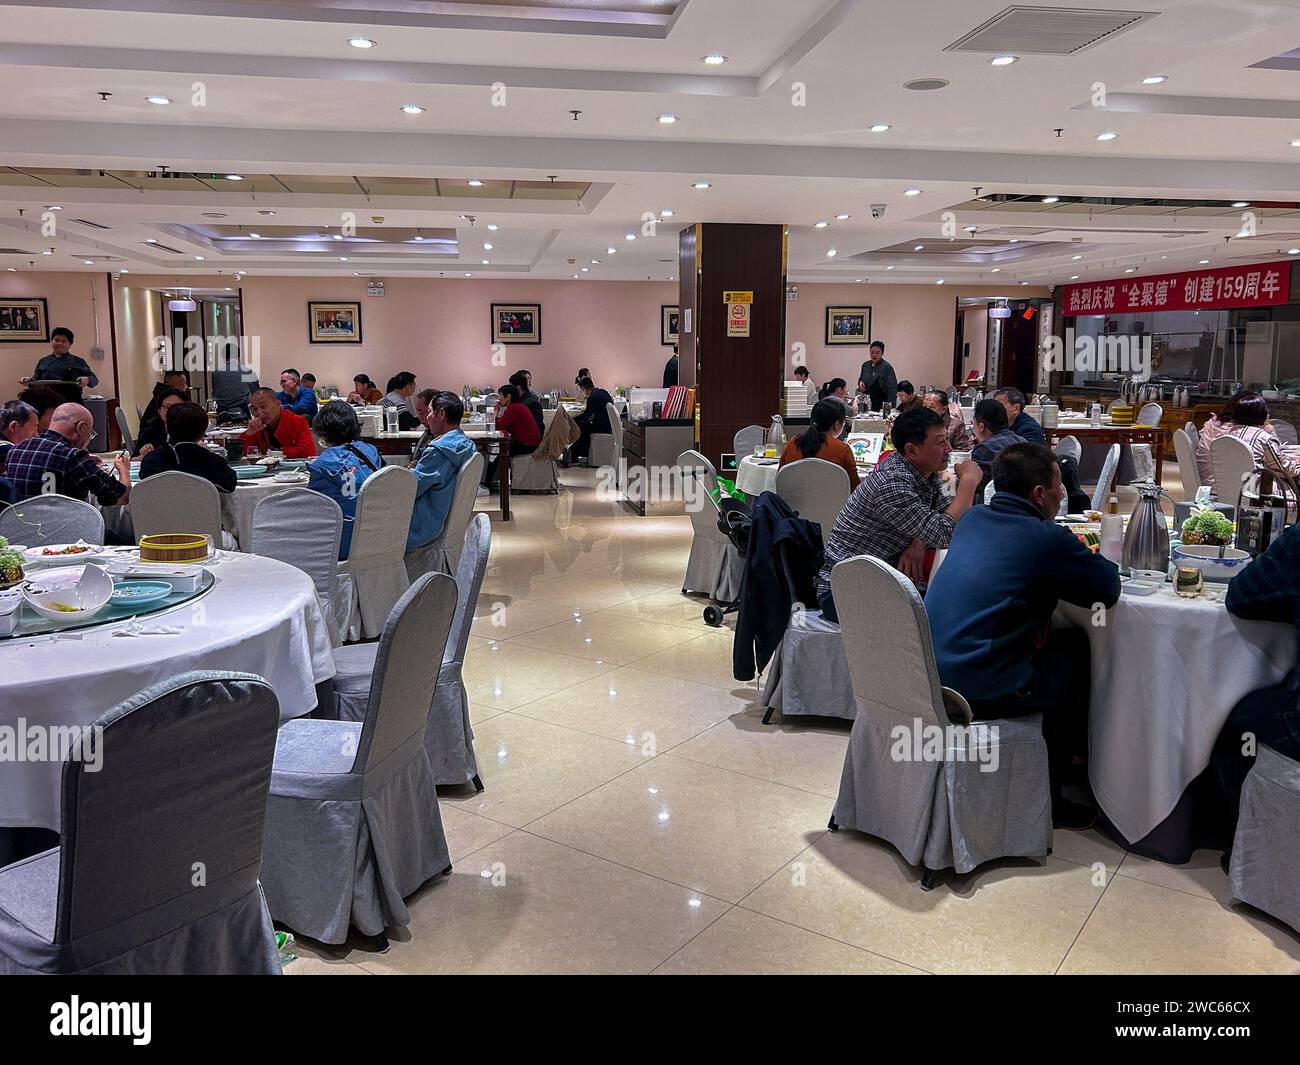 Beijing, China, General View, Wide Angle, Large Crowd People, sitting at tables, inside Fancy Chinese Restaurant, « Quanjude » Contemporary interiors Stock Photo